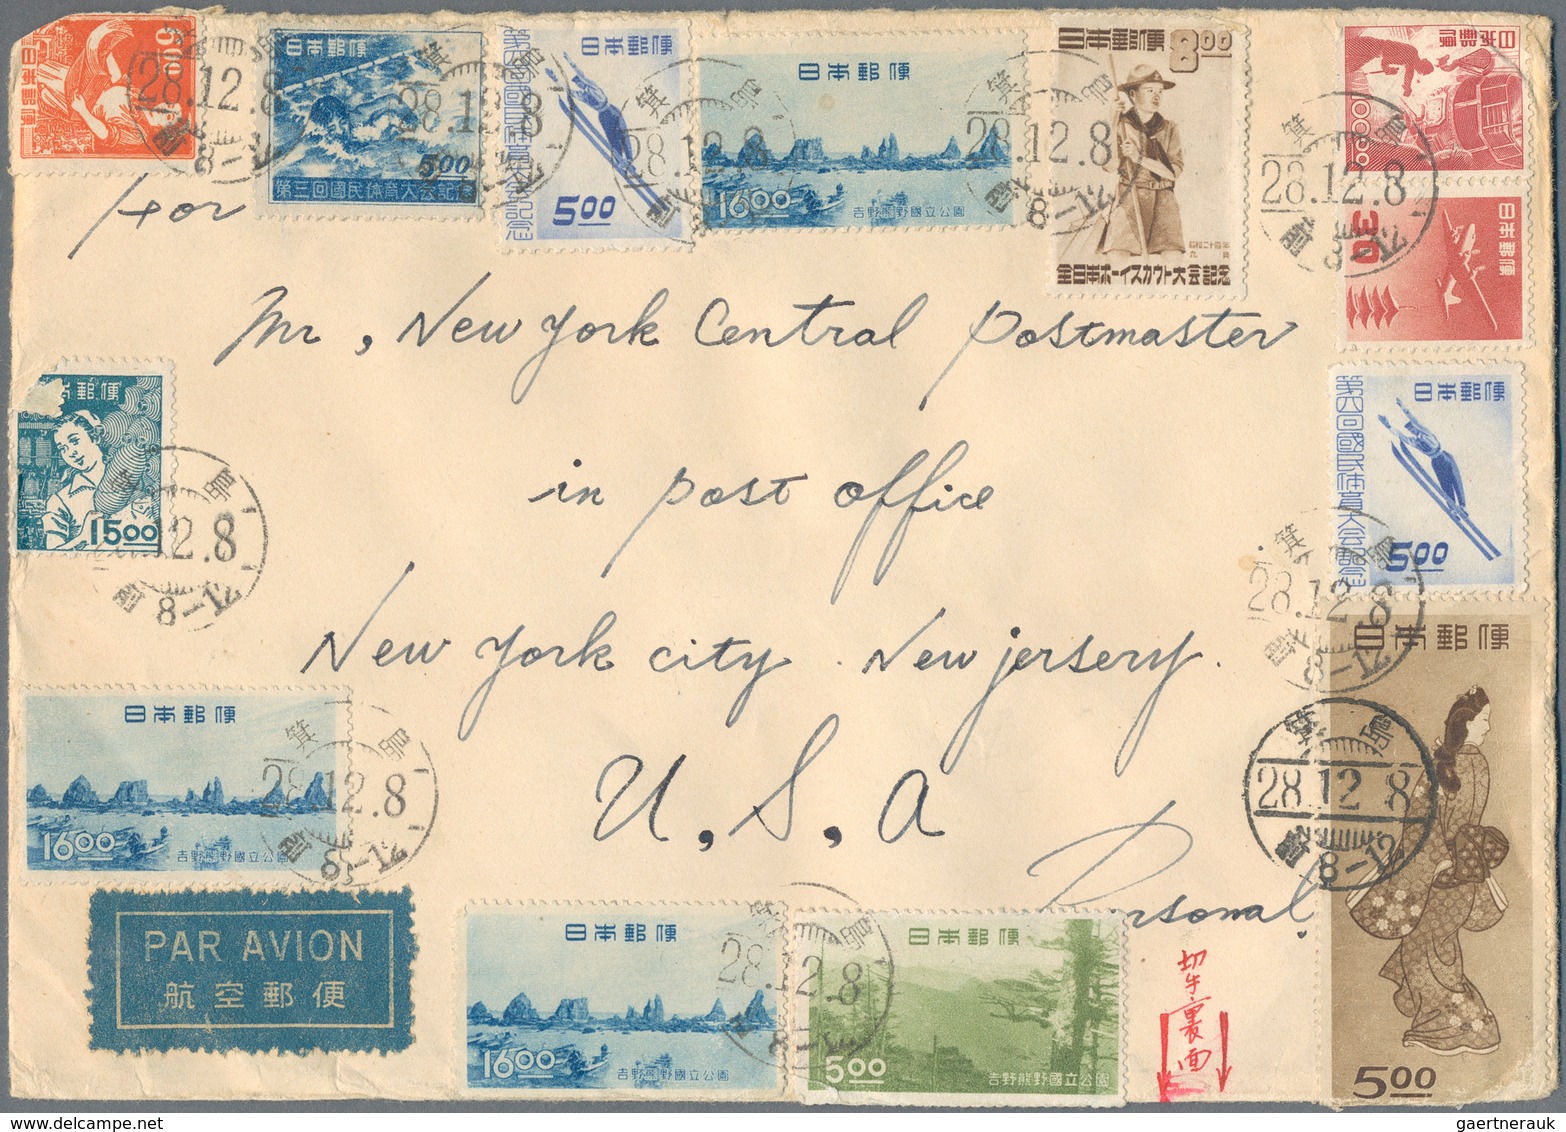 Japan: 1899/1991 (ca.), covers (34), ppc (16 inc. 6 used) all used foreign inc. two from Kongju (Kor